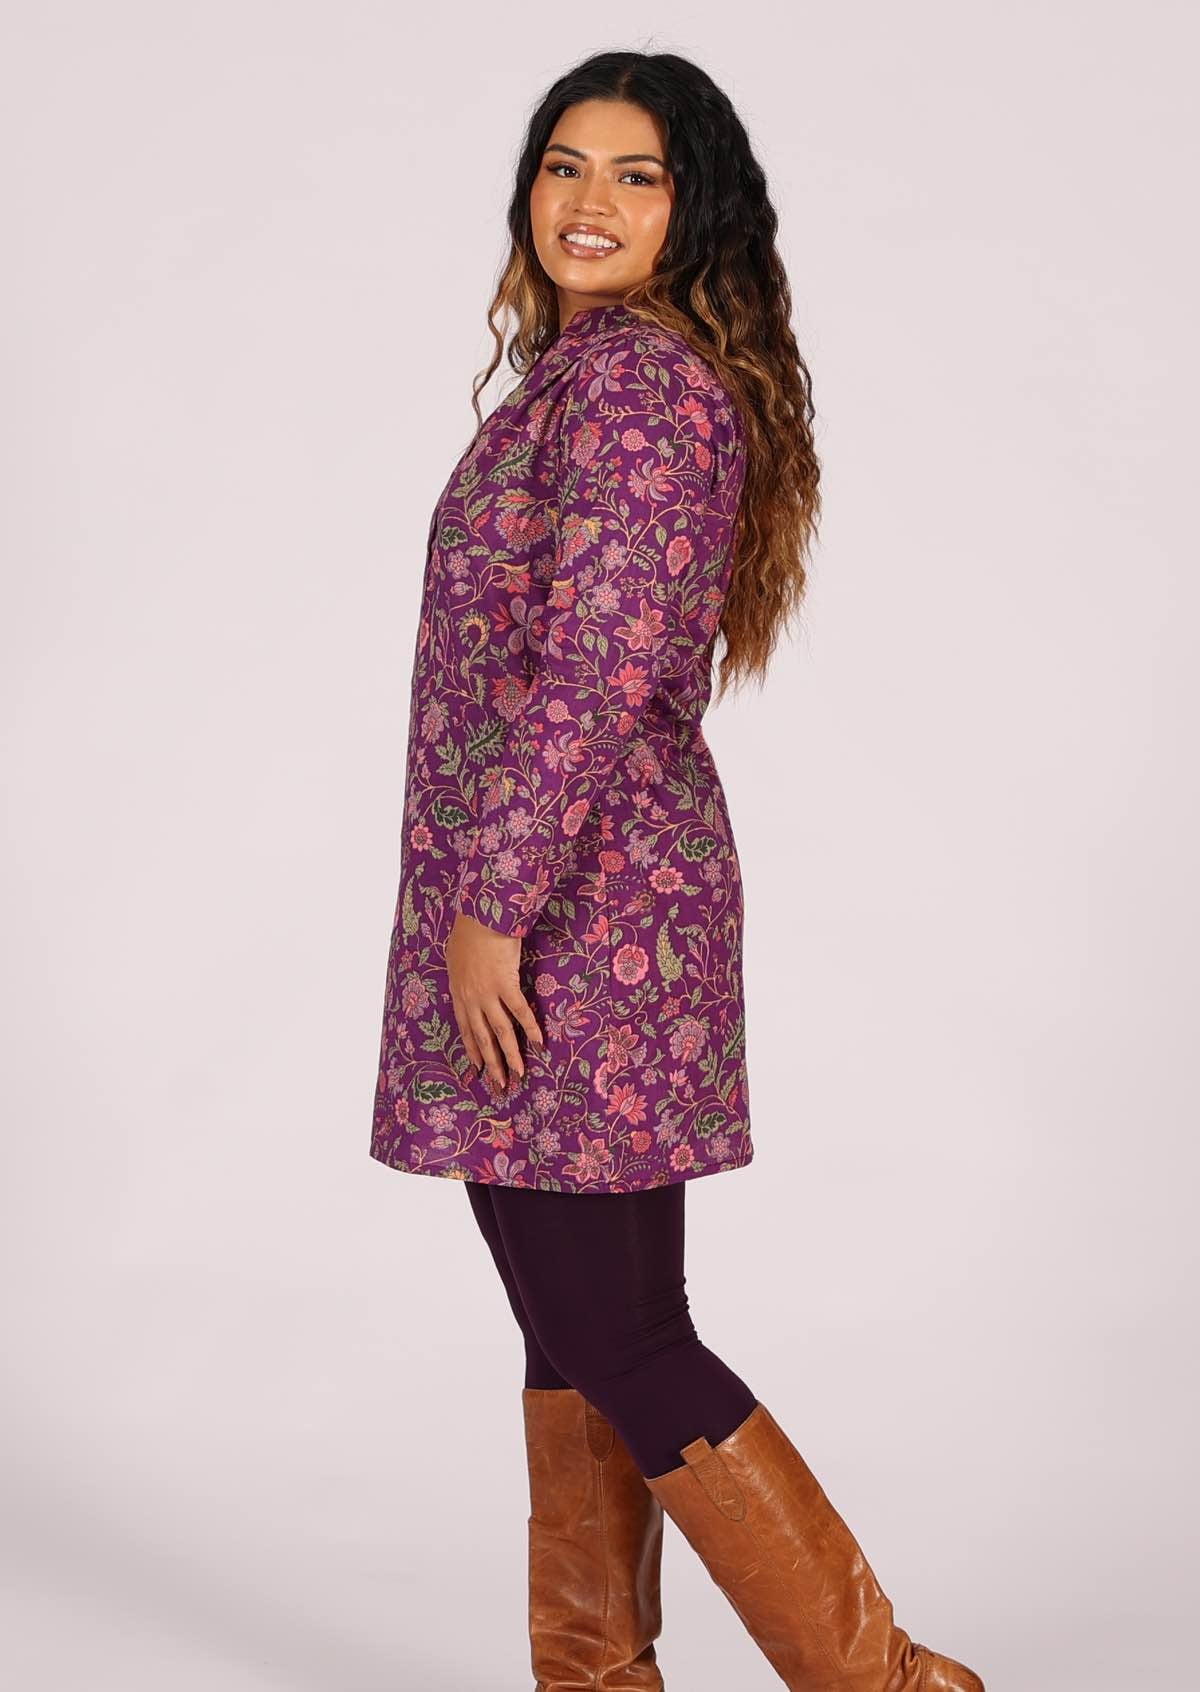 100% cotton long sleeve tunic in sweet floral print on purple base